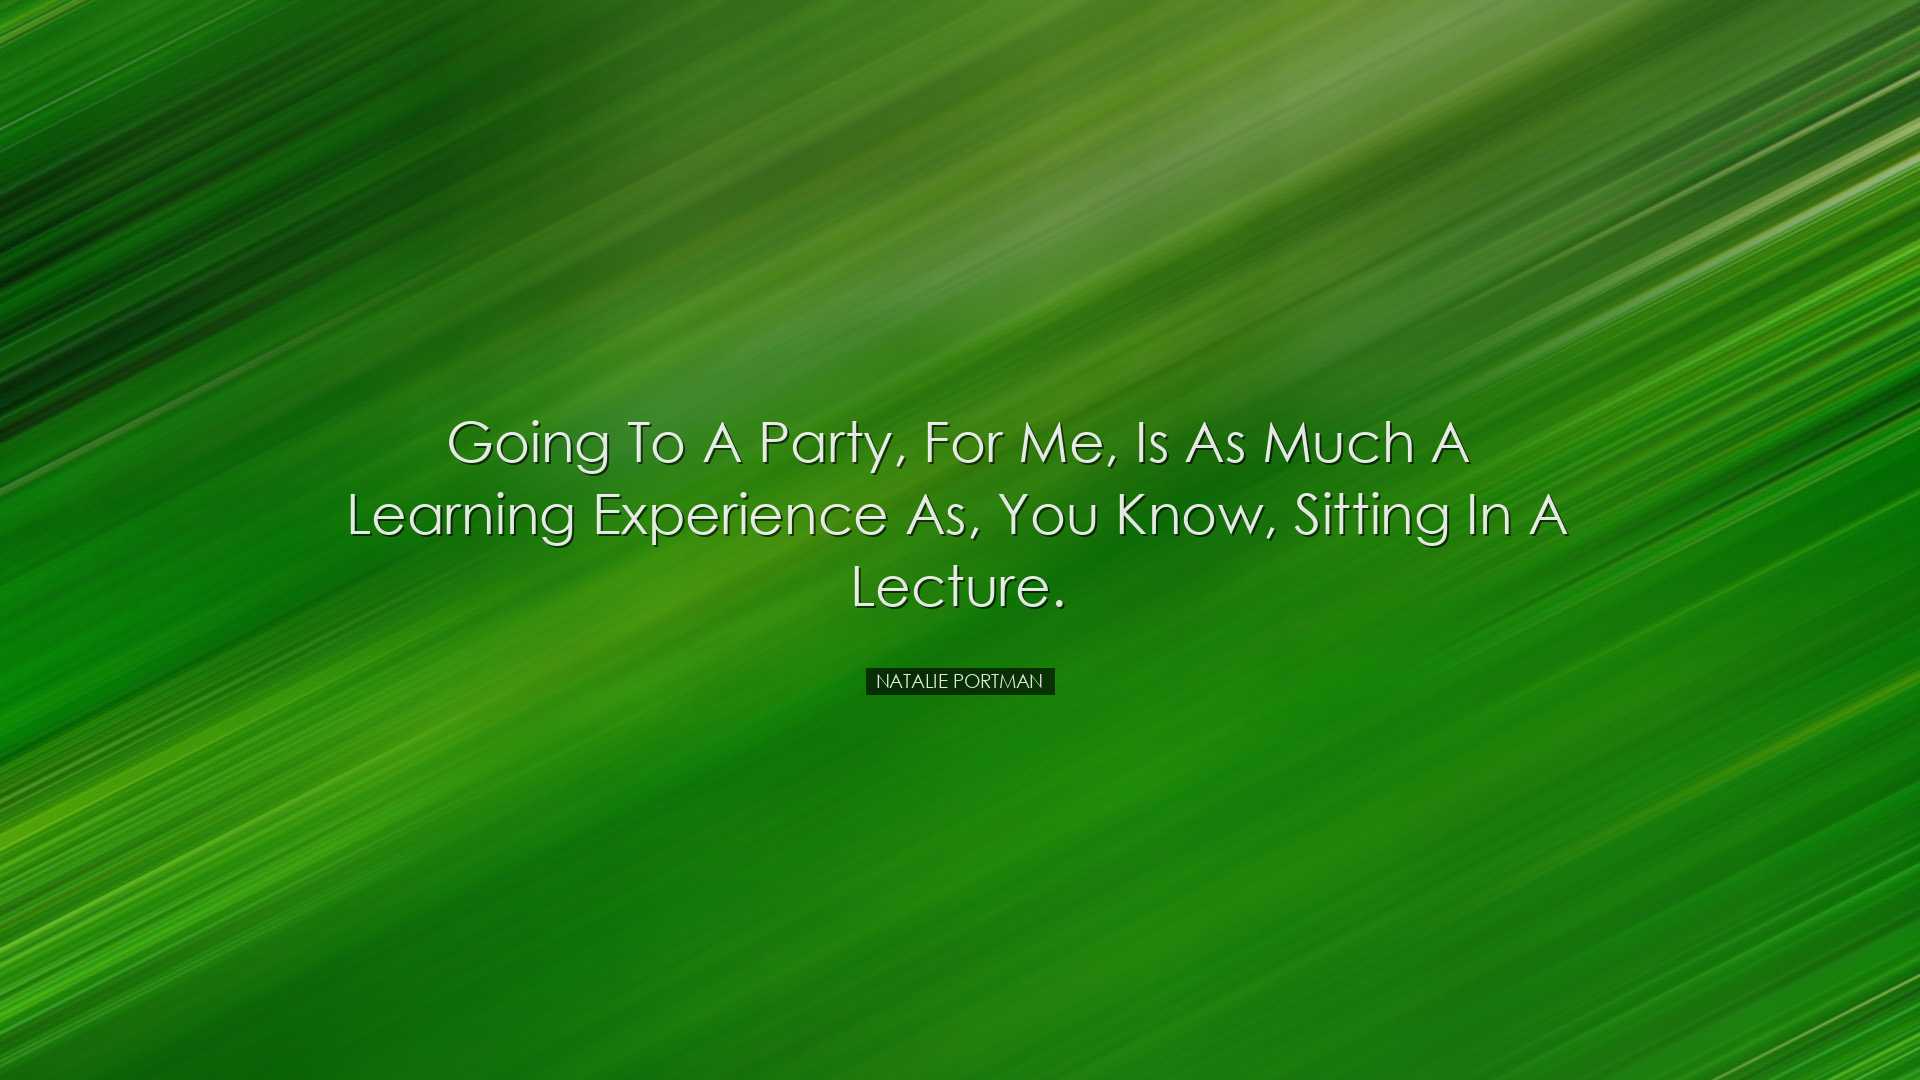 Going to a party, for me, is as much a learning experience as, you